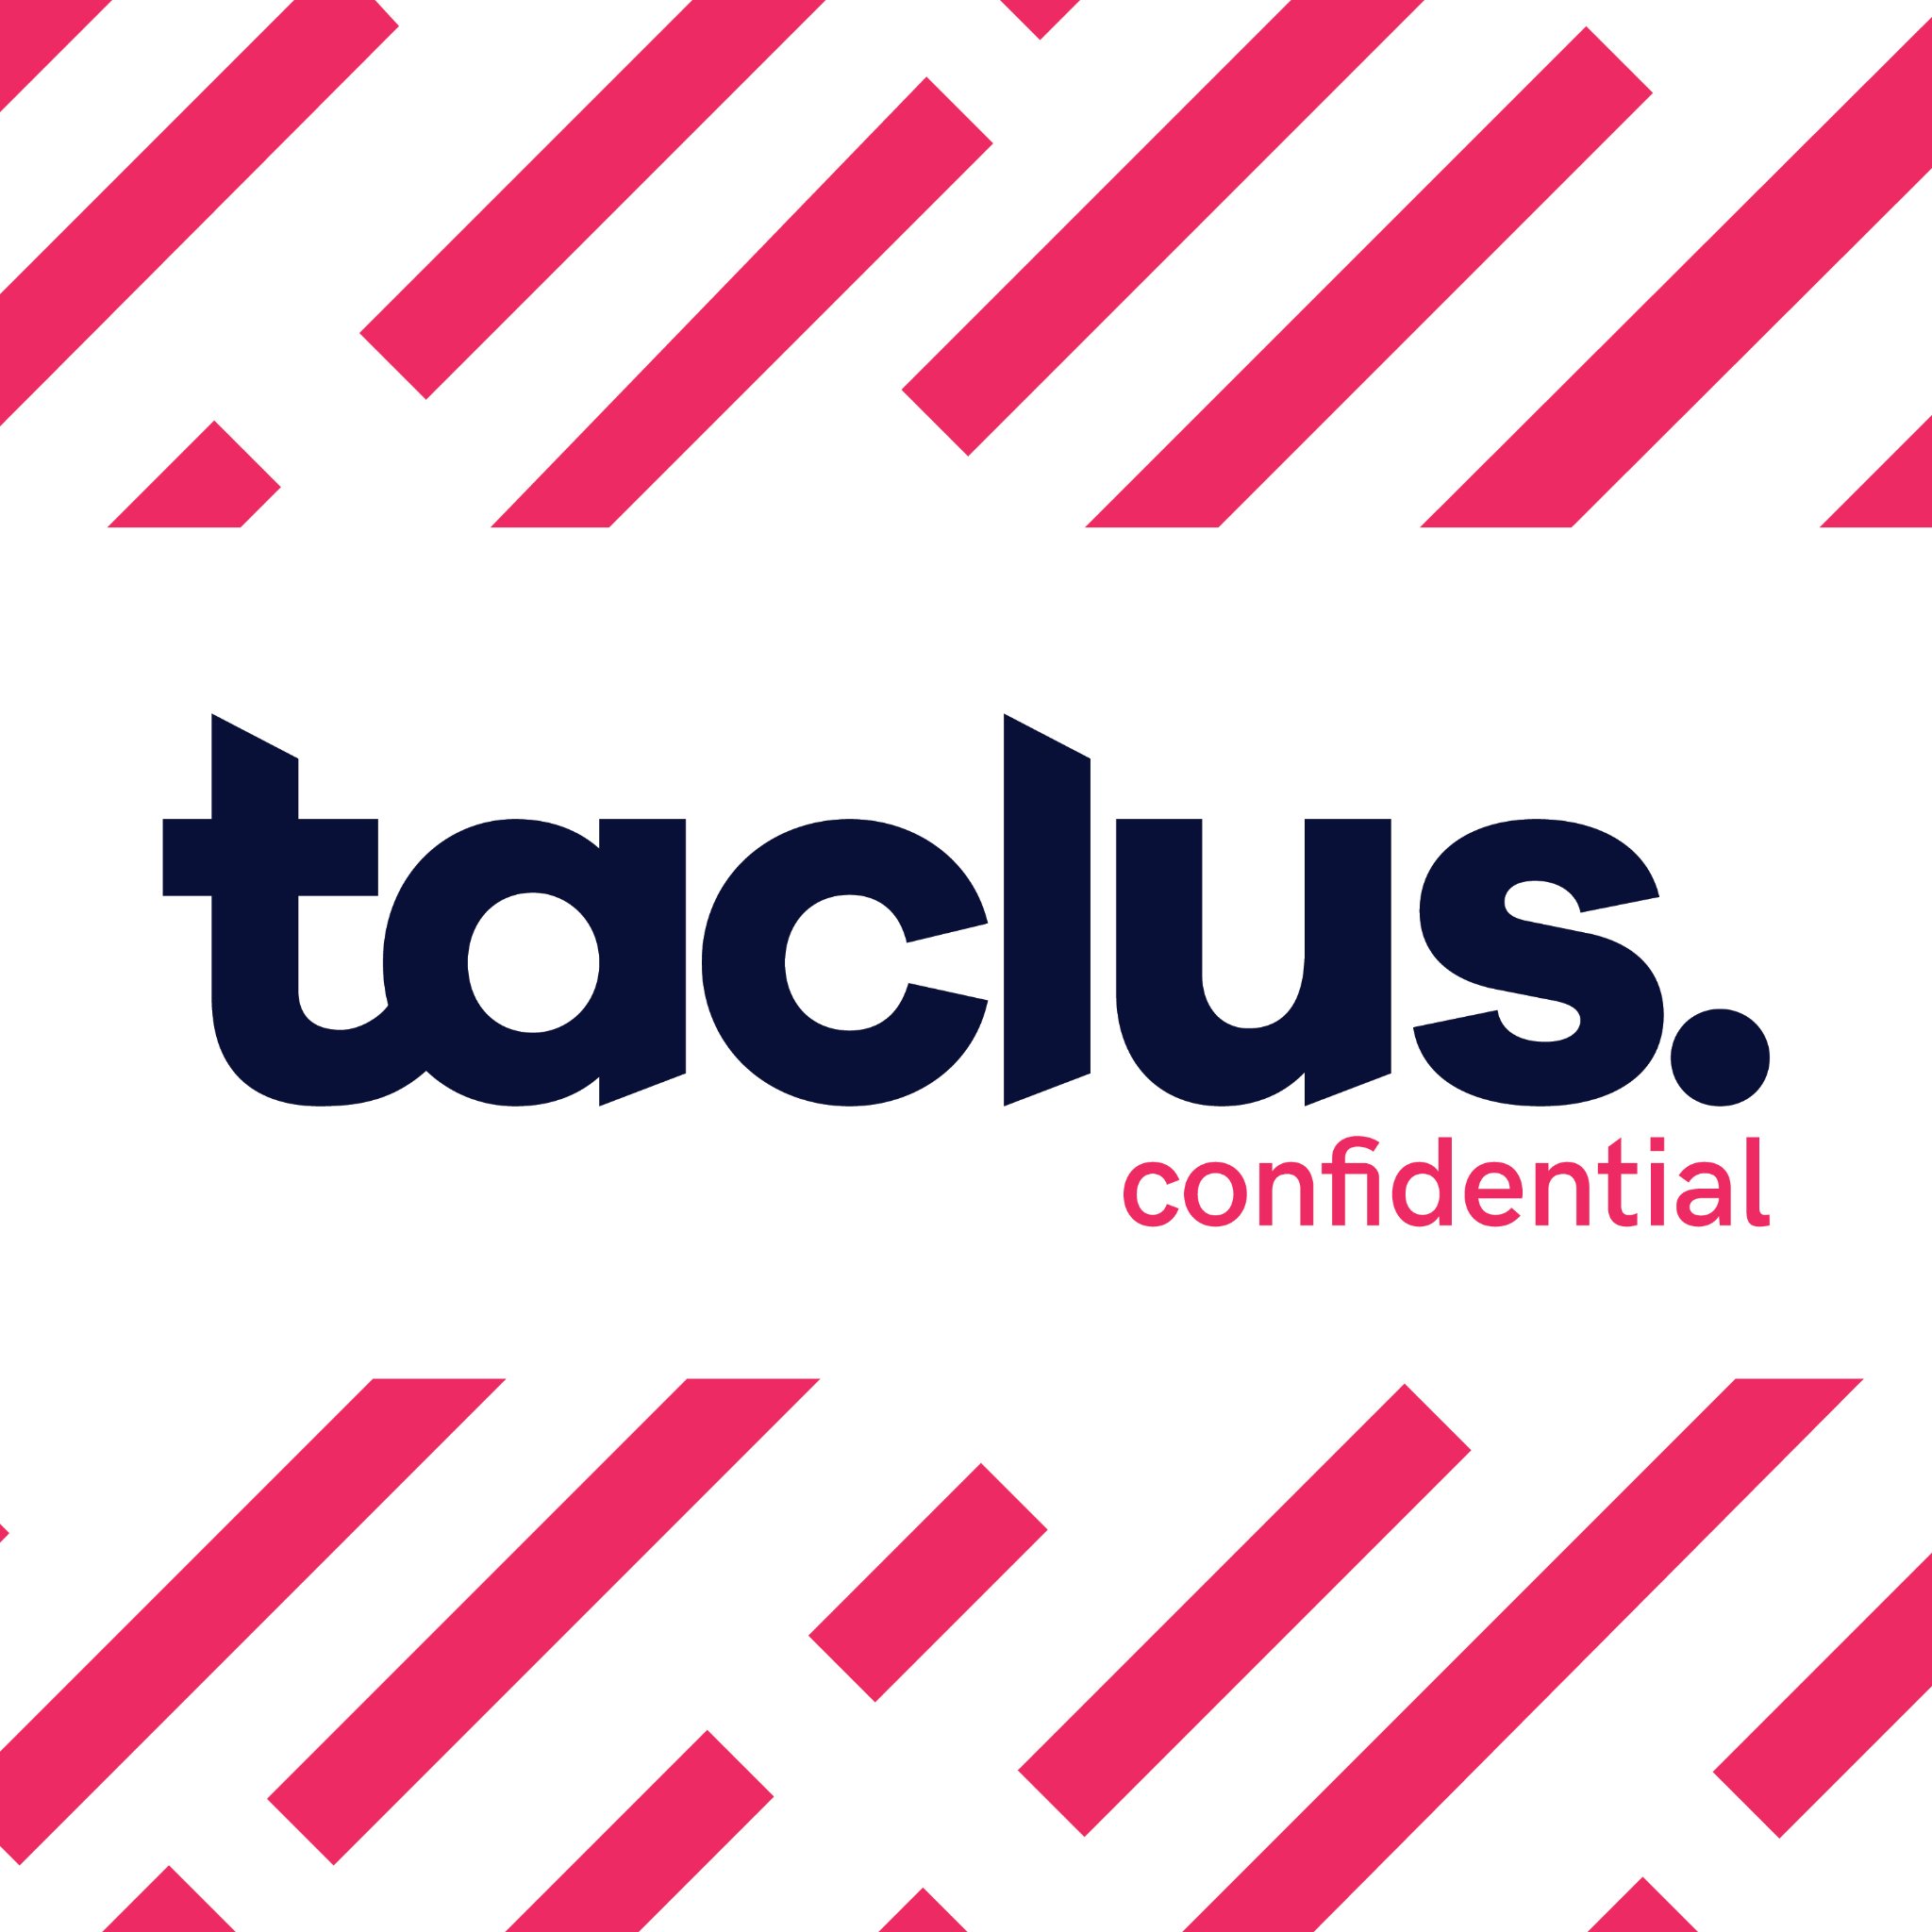 Taclus Confidential provides confidential shredding services across South Wales. Contact us today for a free quote!